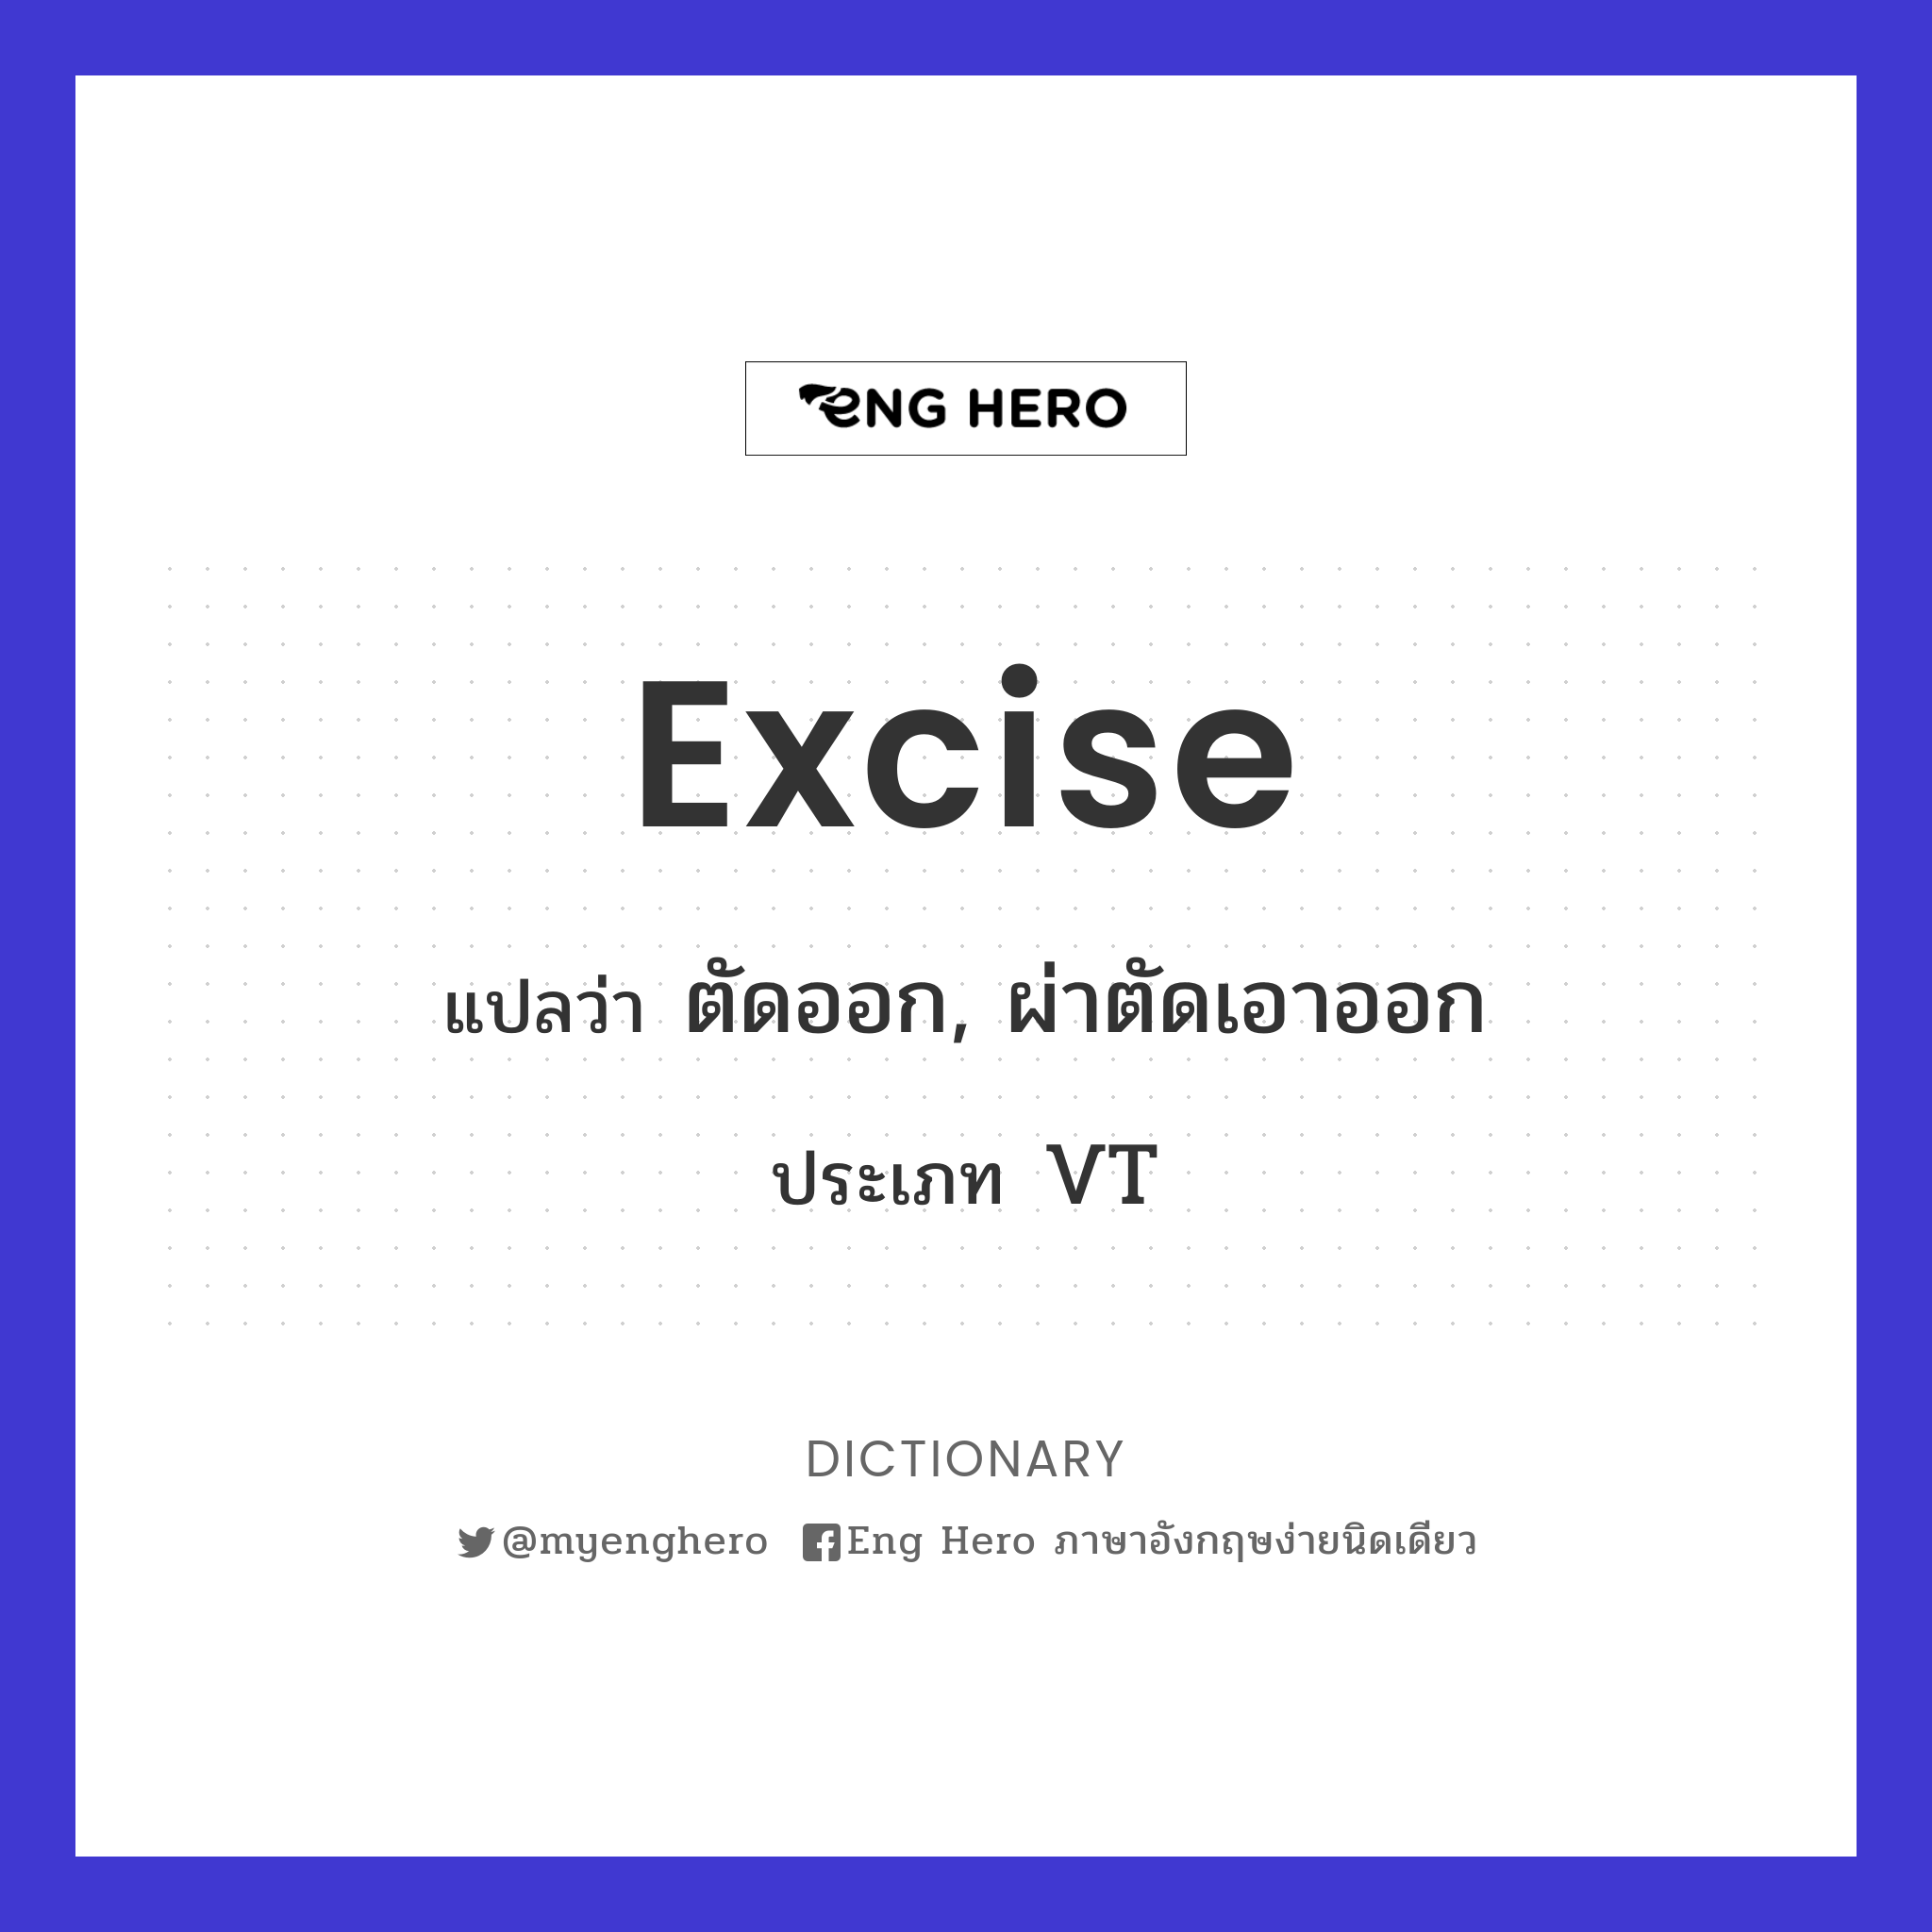 excise